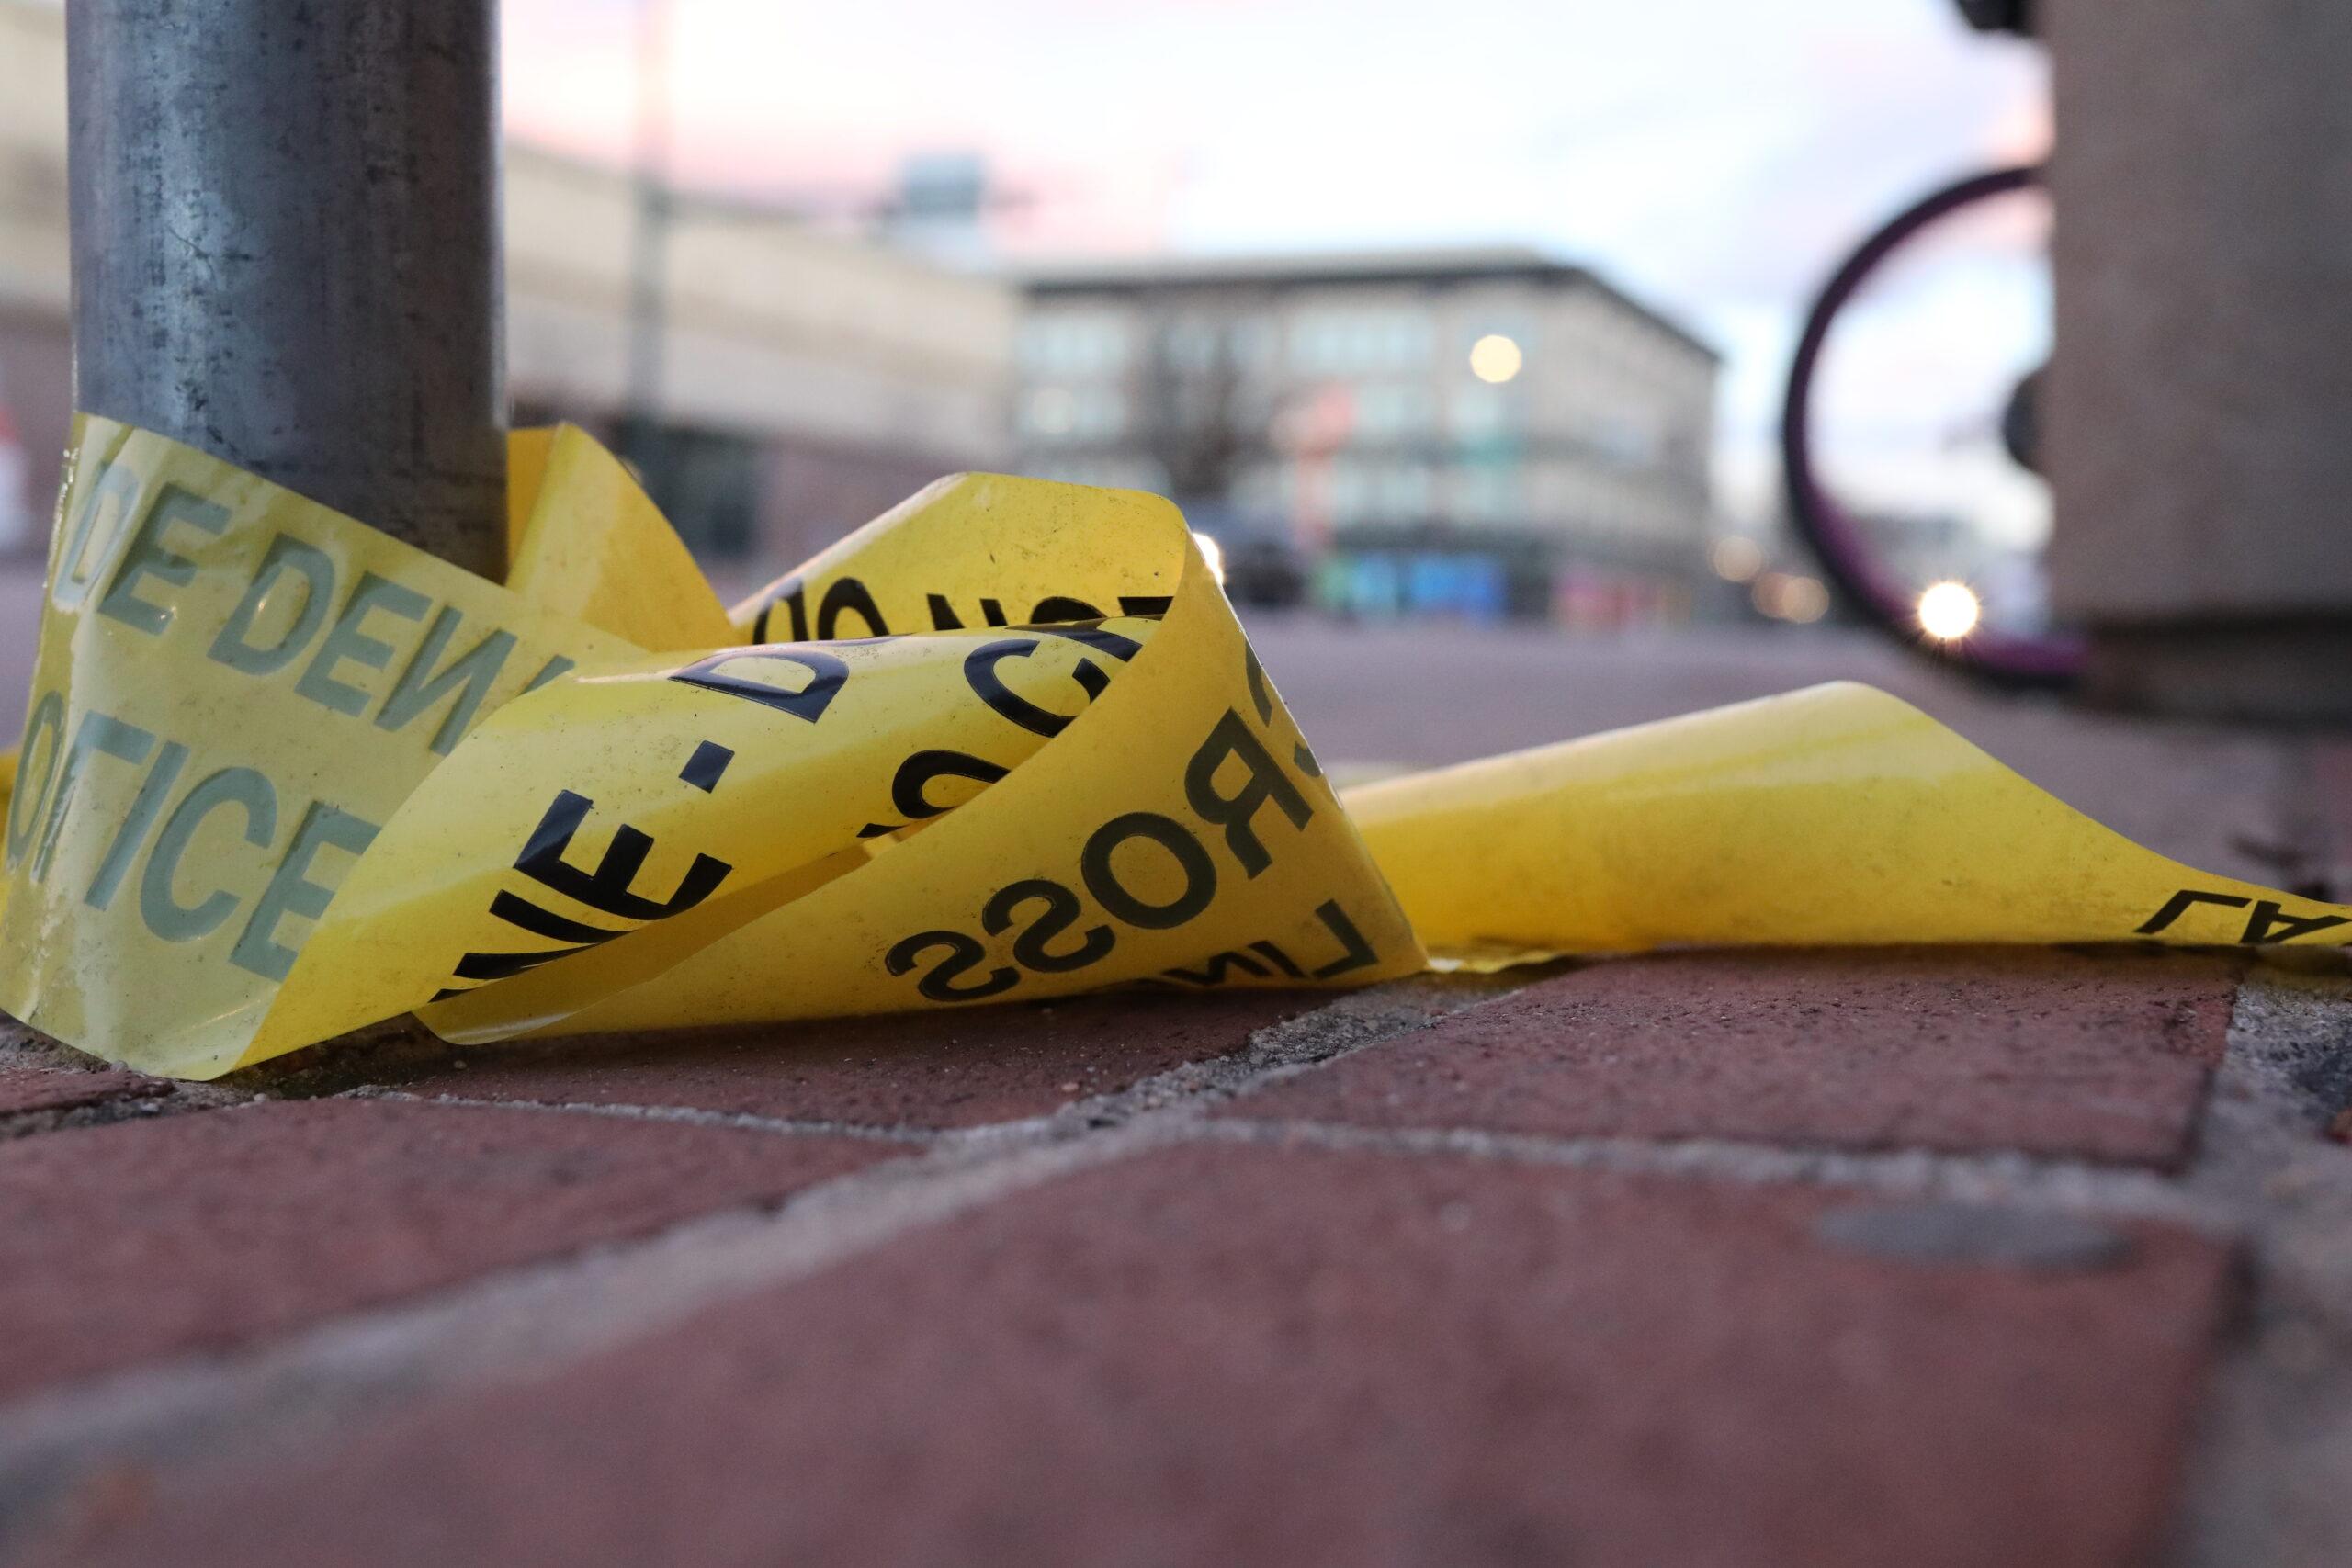 Police tape lies on the ground at 1st Avenue and Broadway in Denver after a shooting nearby on Monday, December 27, 2021.